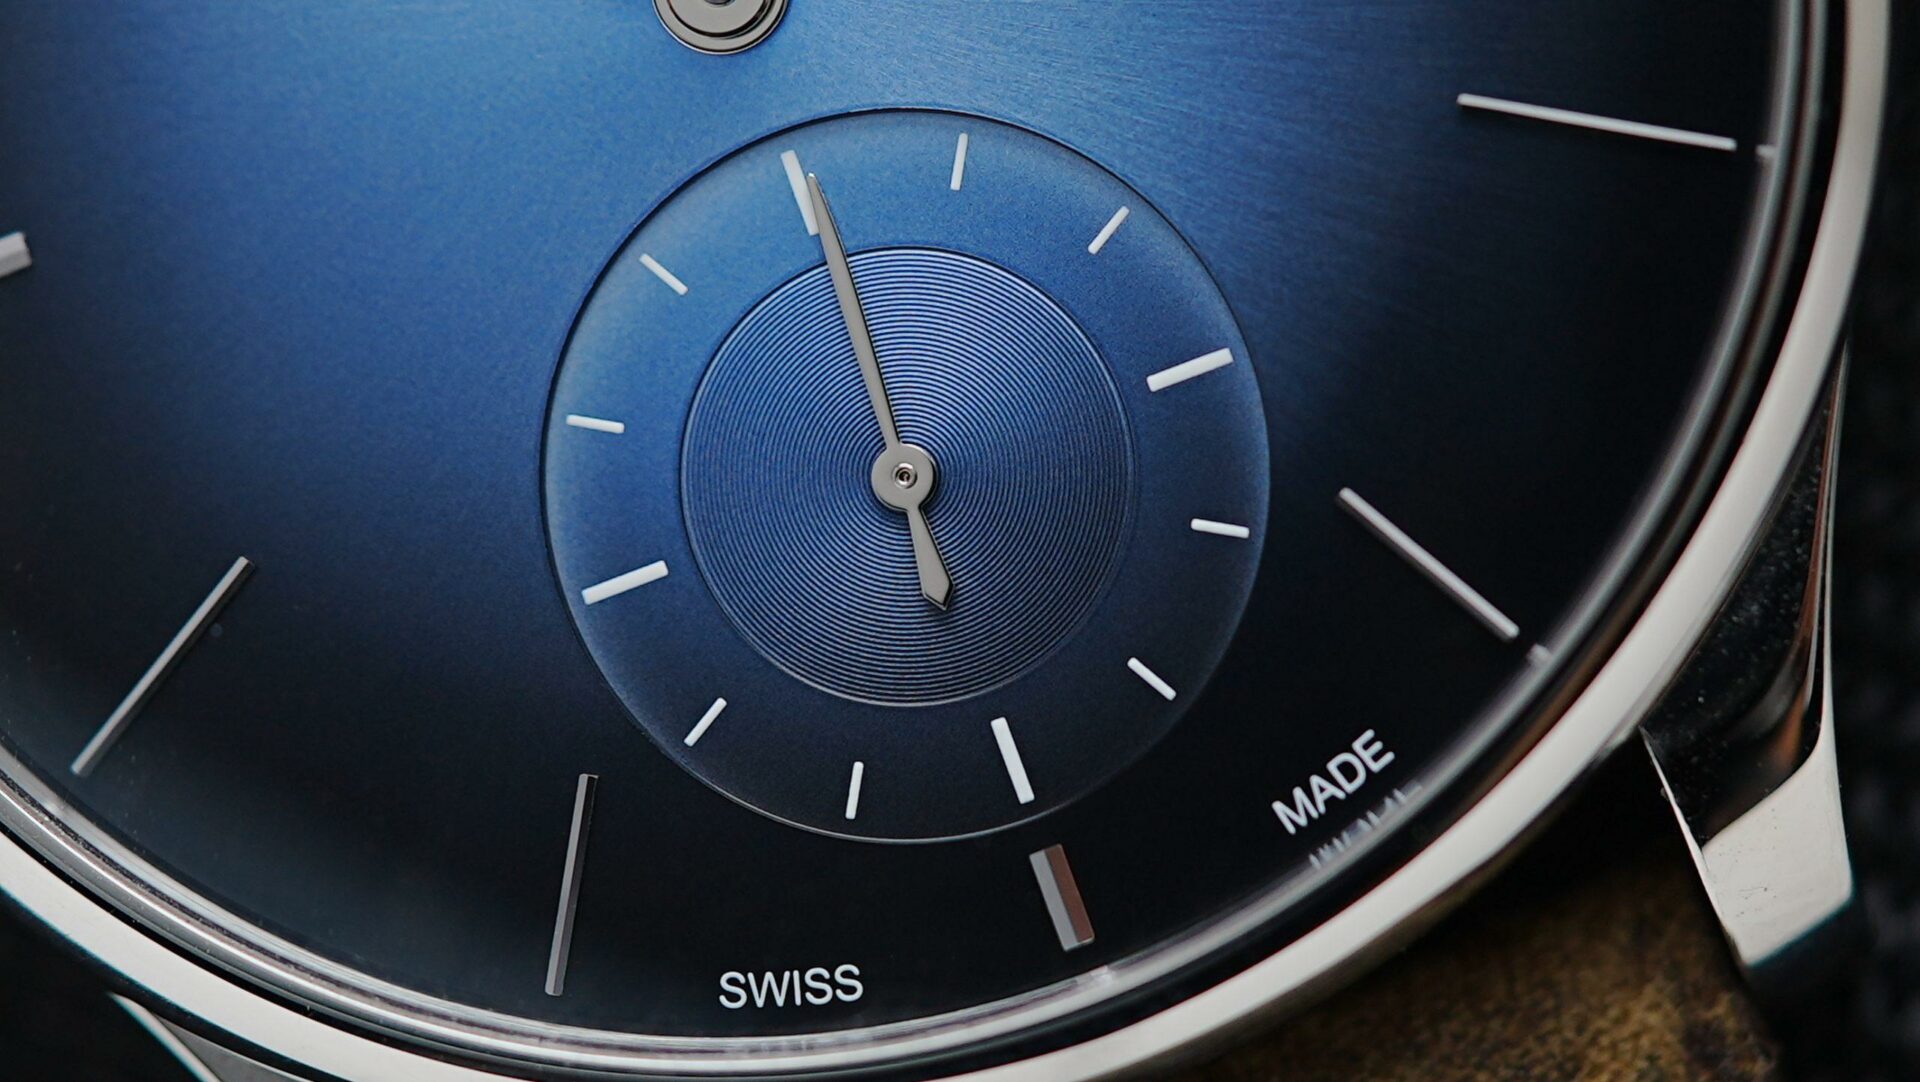 H.Moser & Cie. Venturer Small Seconds Xl watch dial zoomed in.